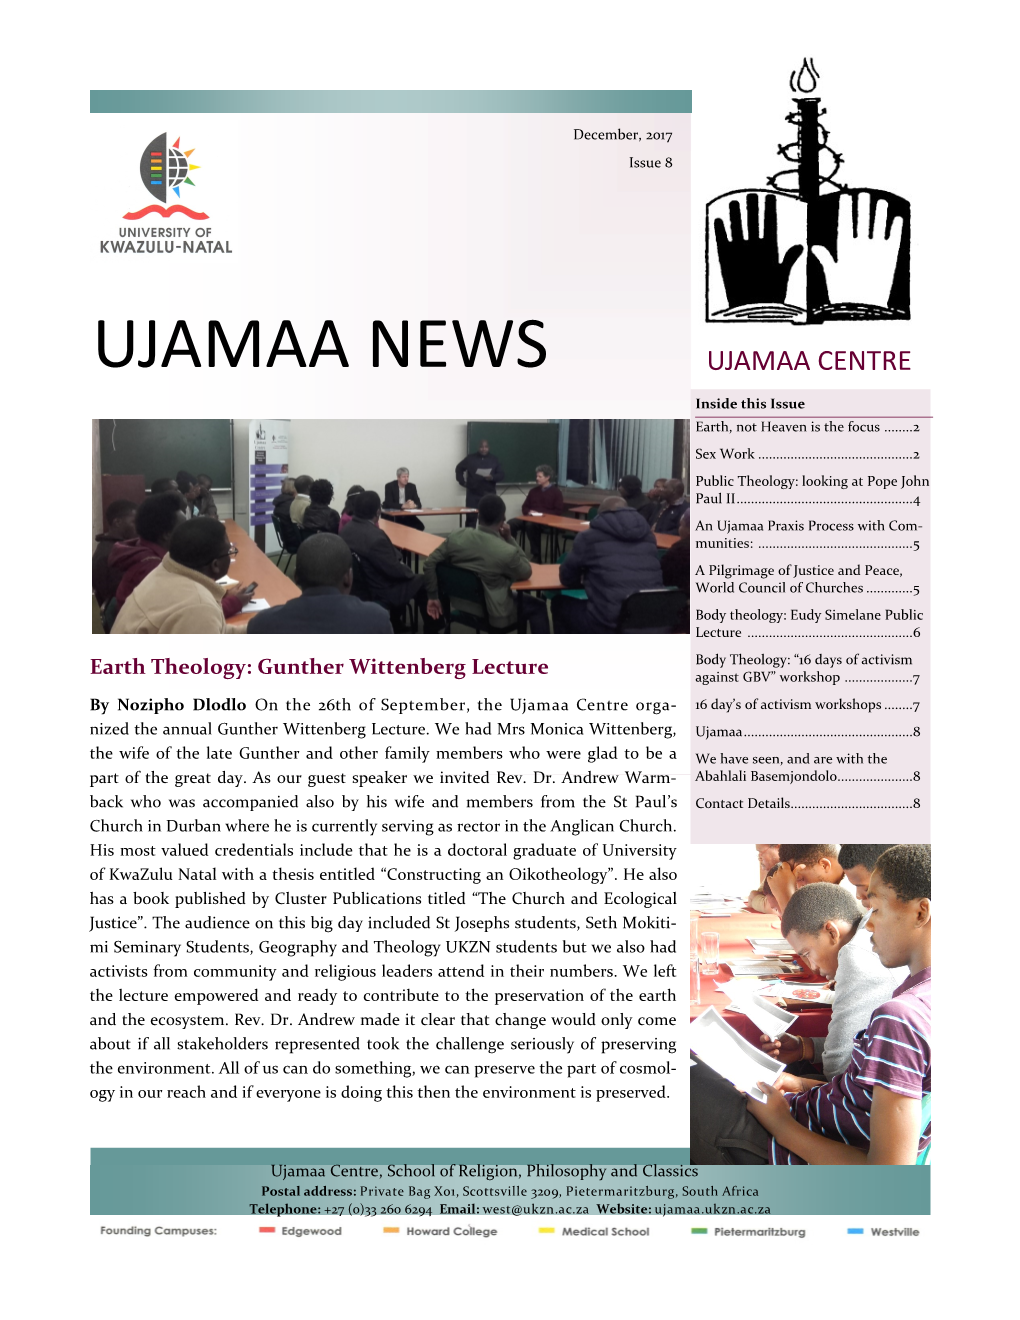 UJAMAA NEWS UJAMAA CENTRE Inside This Issue Earth, Not Heaven Is the Focus